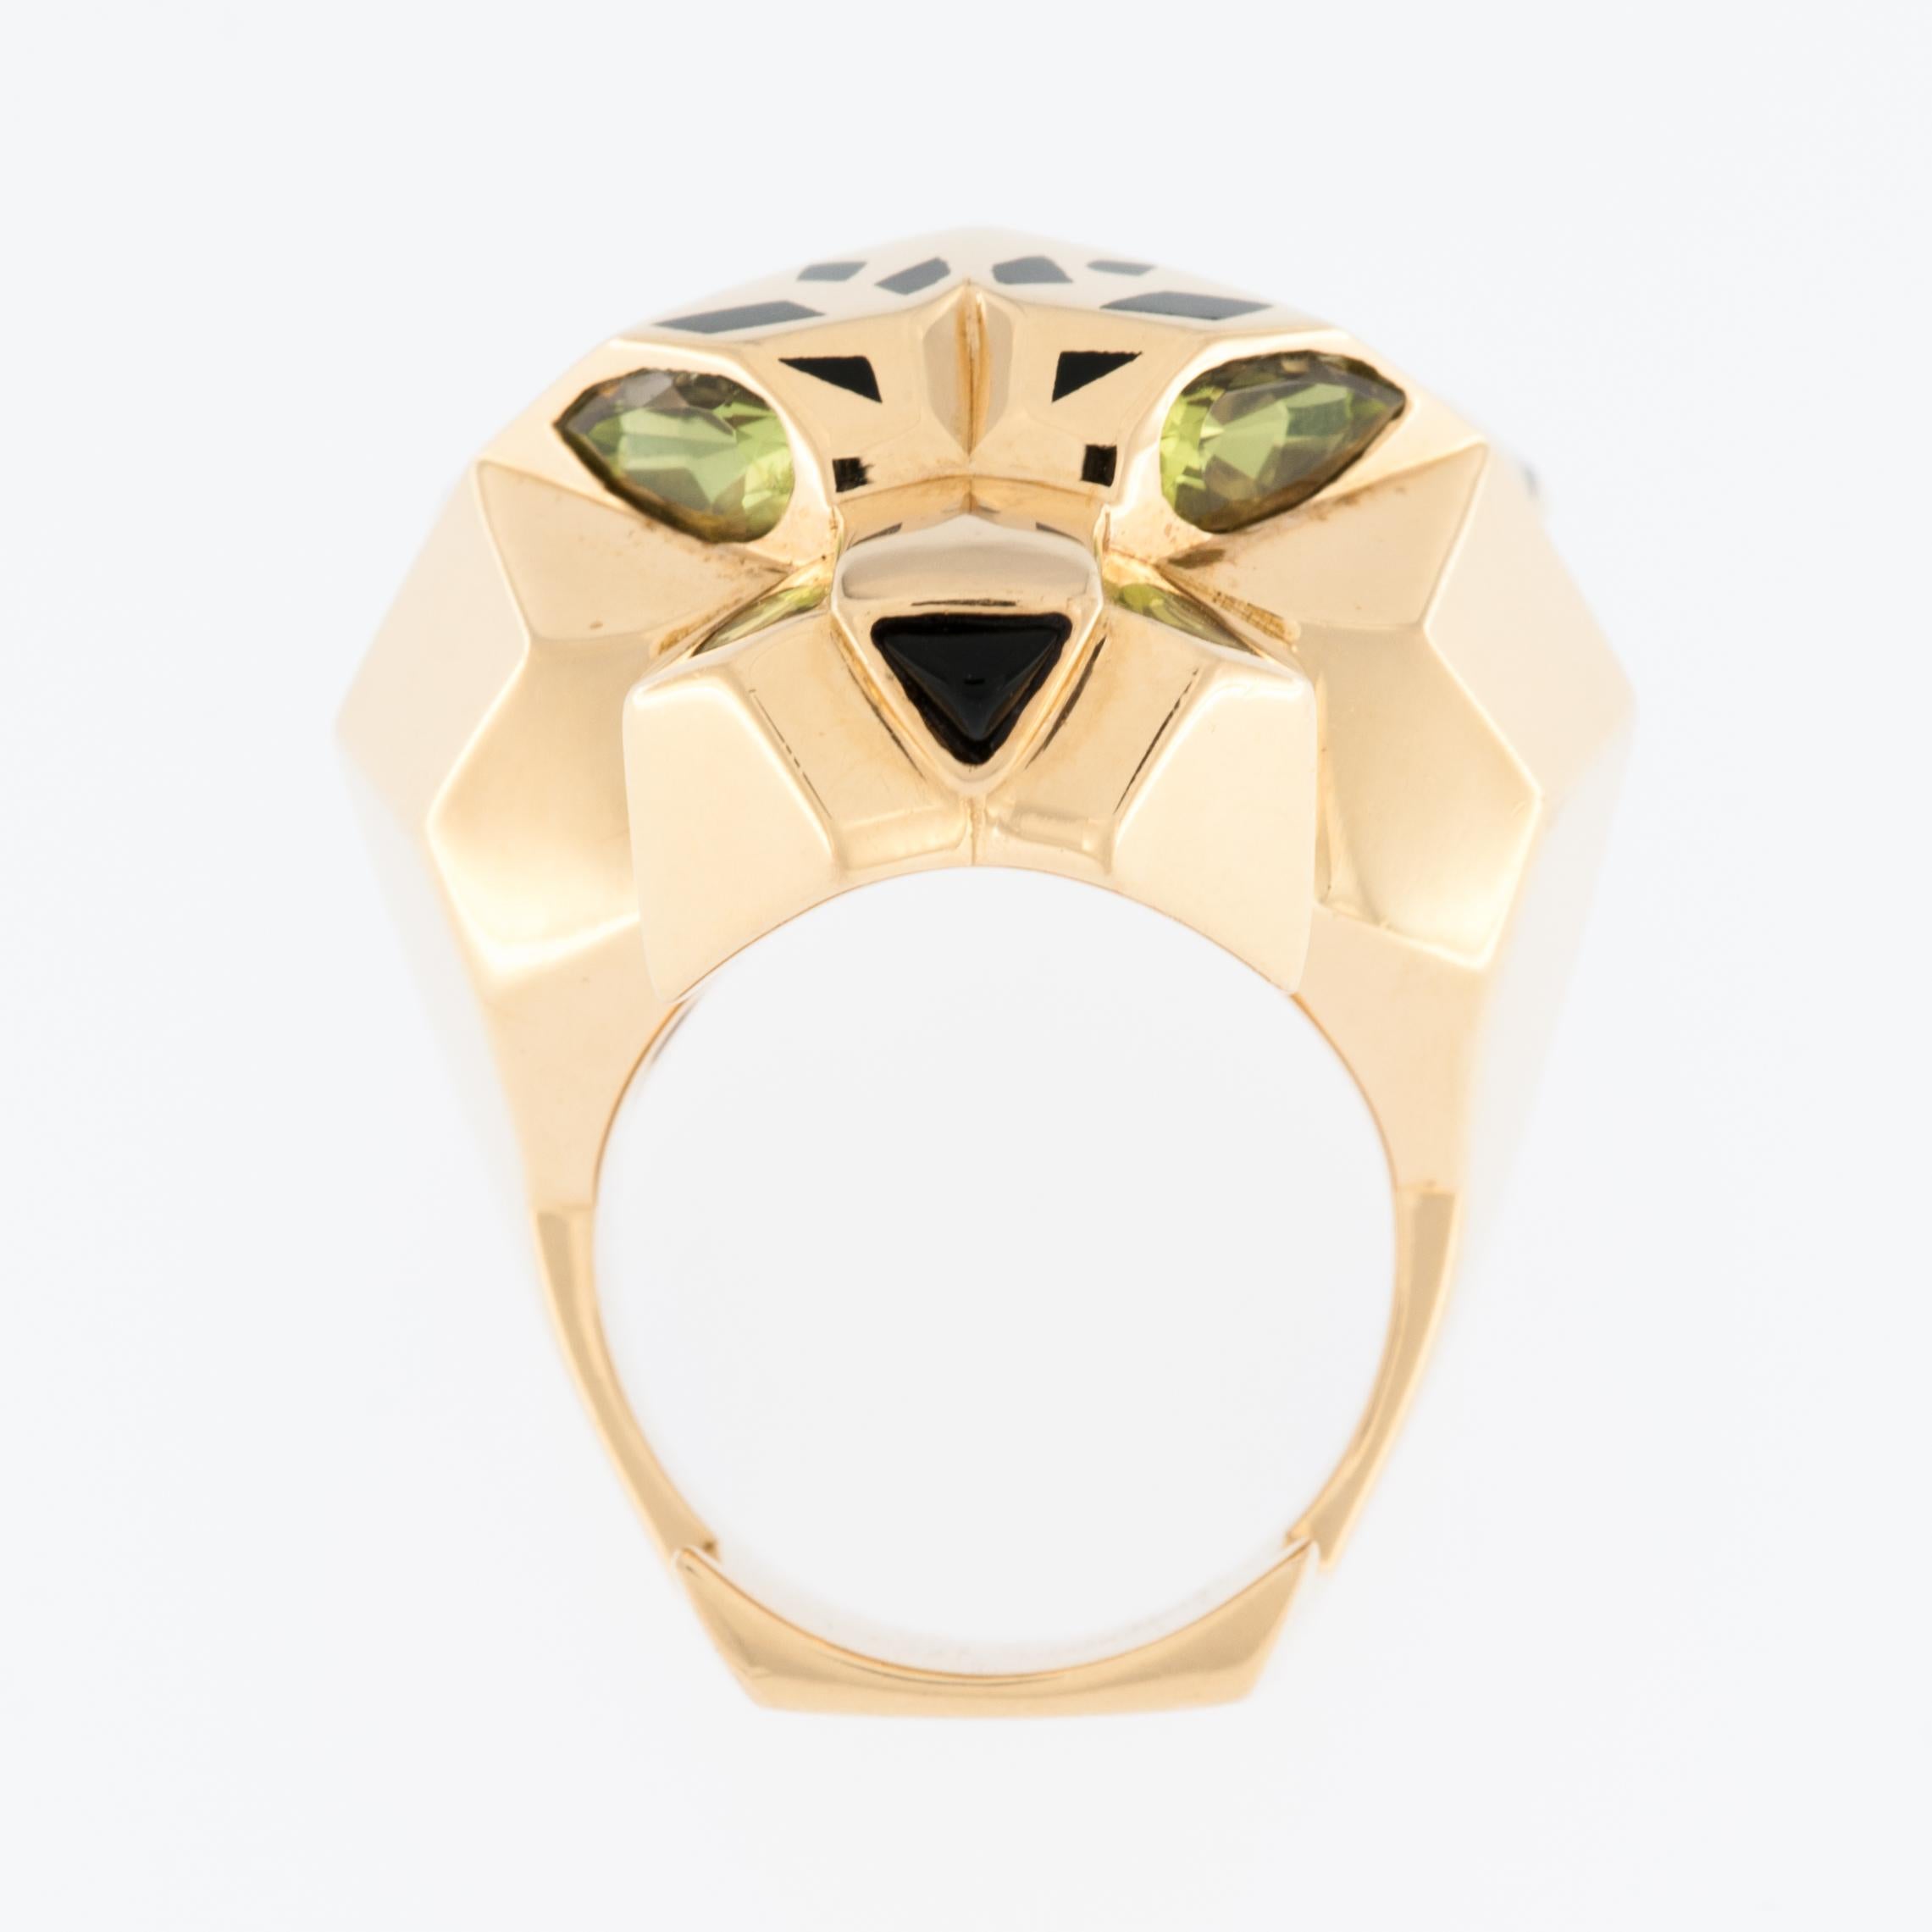 The Cartier Panthère 18kt Yellow Gold Ring is a luxurious and iconic piece of jewelry from the renowned Cartier brand. This ring features the distinctive and powerful symbol of the panther, a recurring motif in Cartier's design history.

Crafted